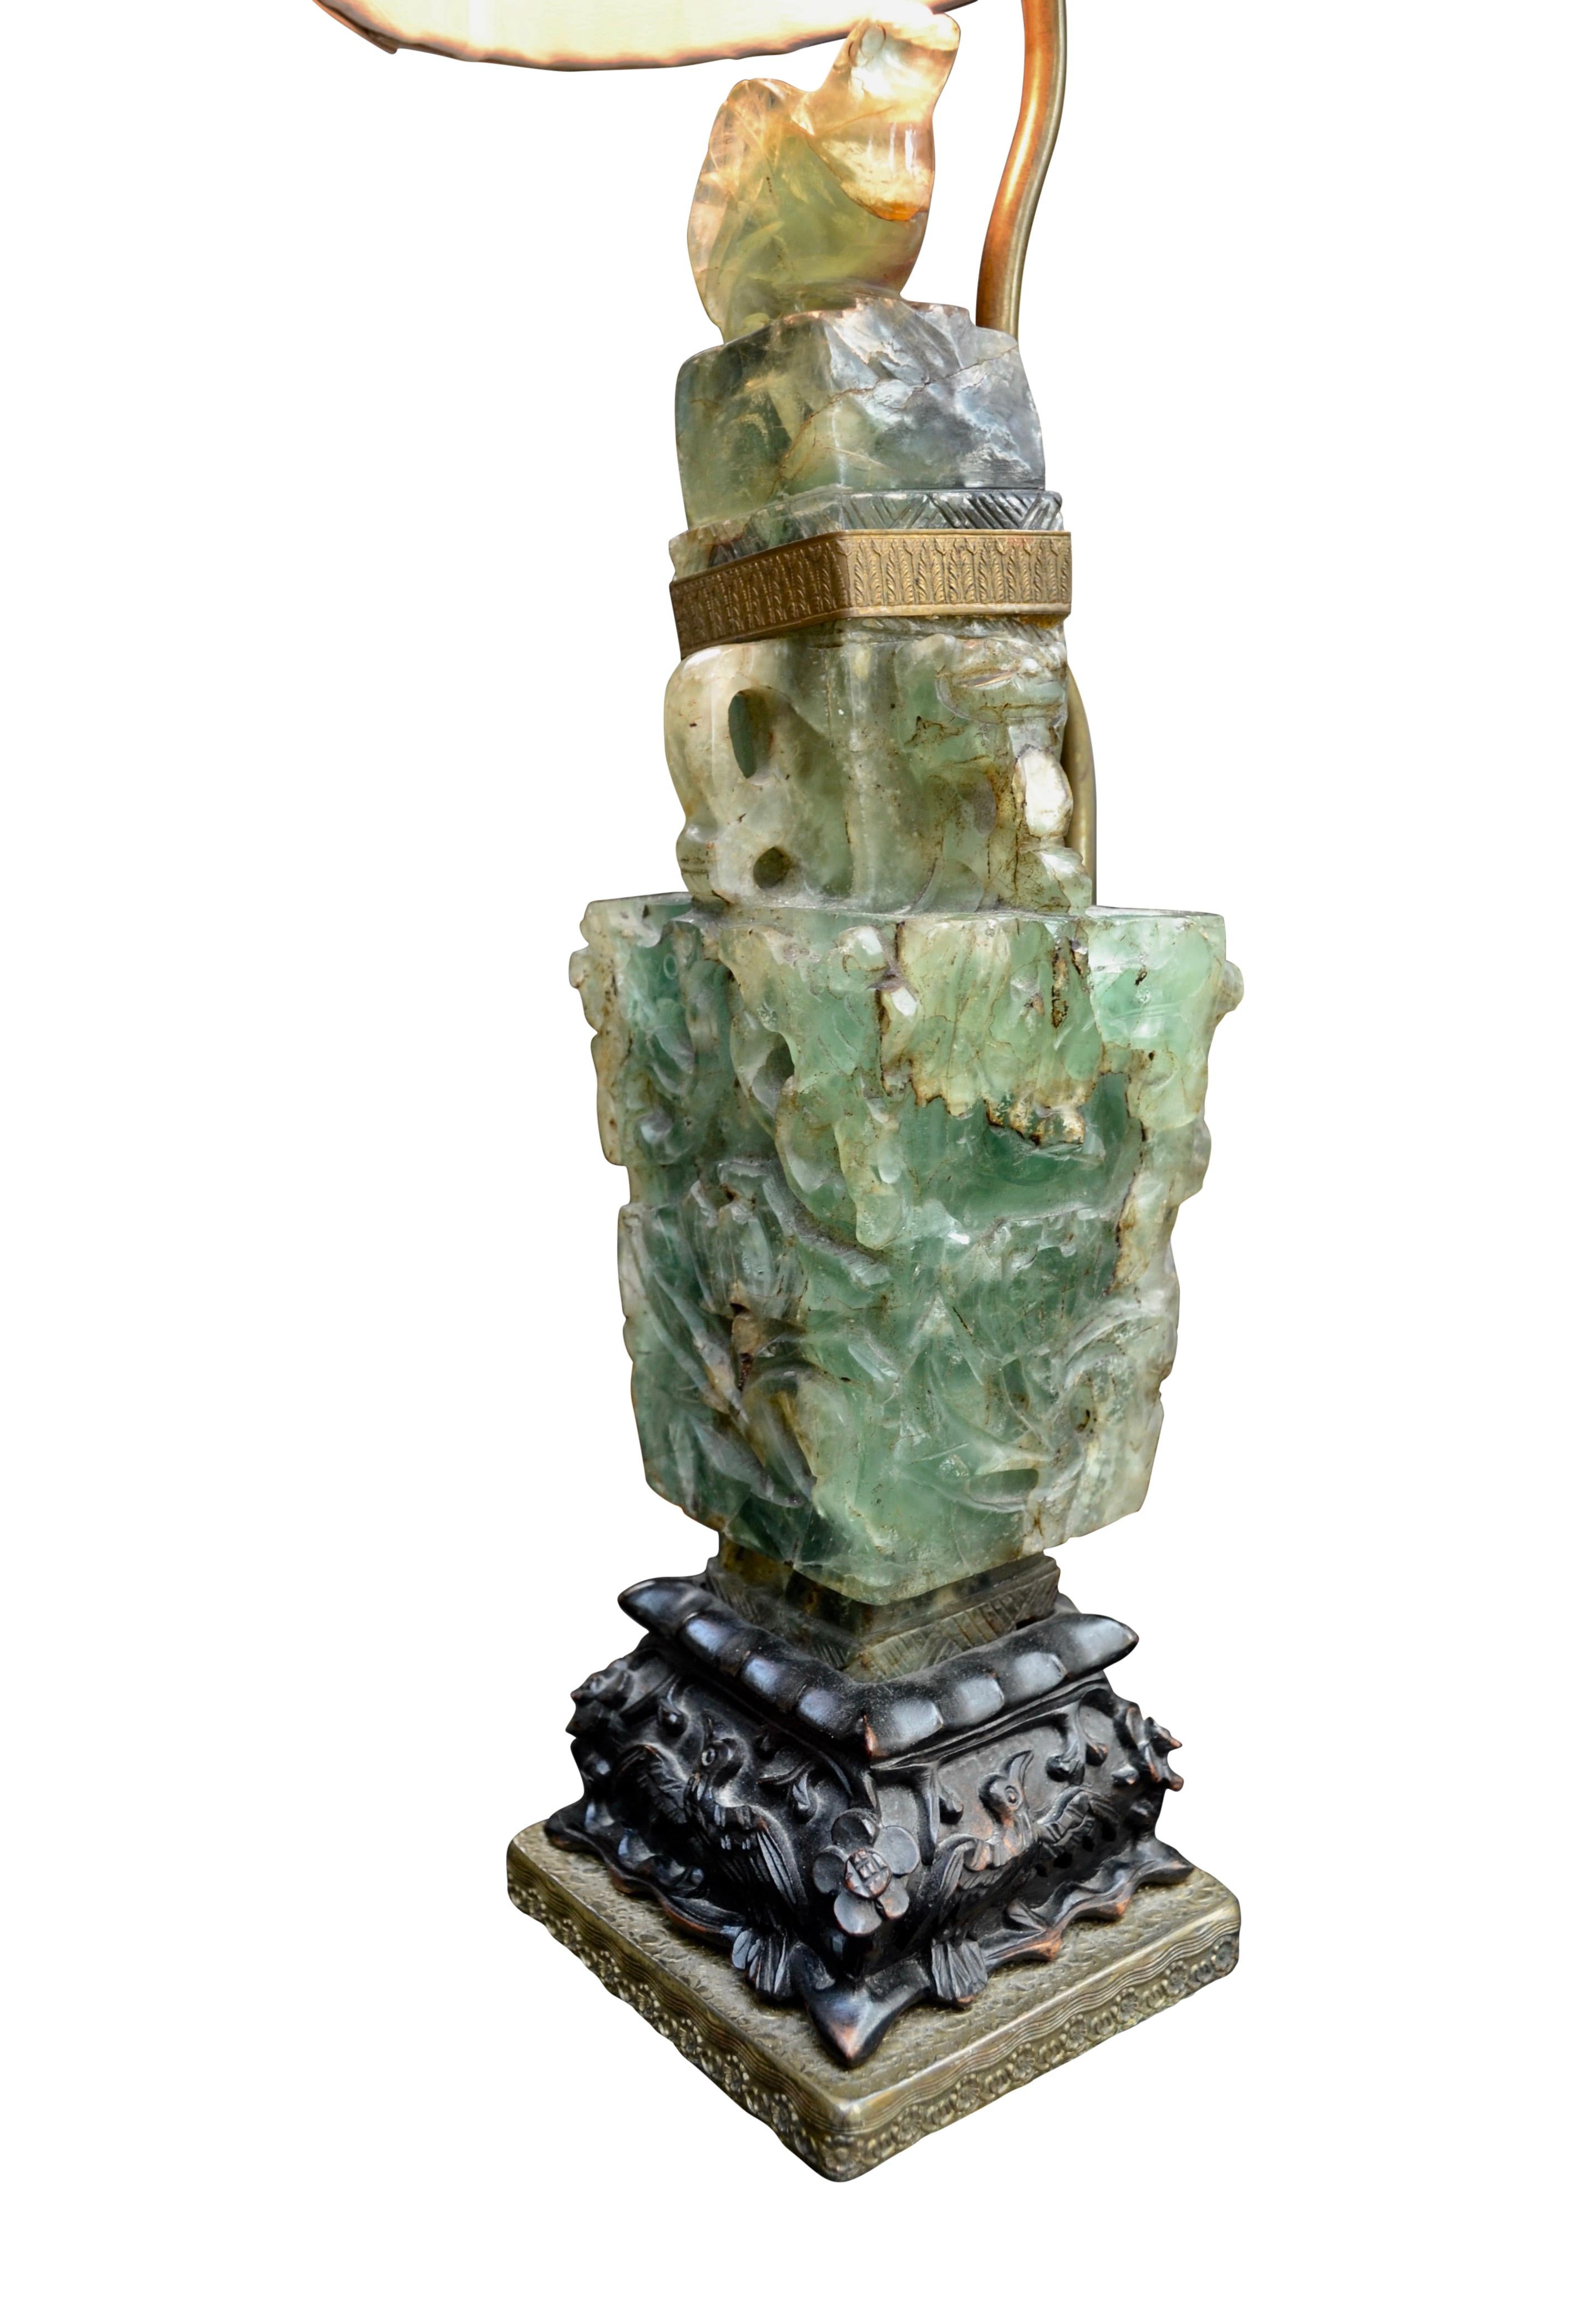 Small Early 20th Century Chinese Green Quartz Lamp with a Jade Finial In Good Condition For Sale In Vancouver, British Columbia